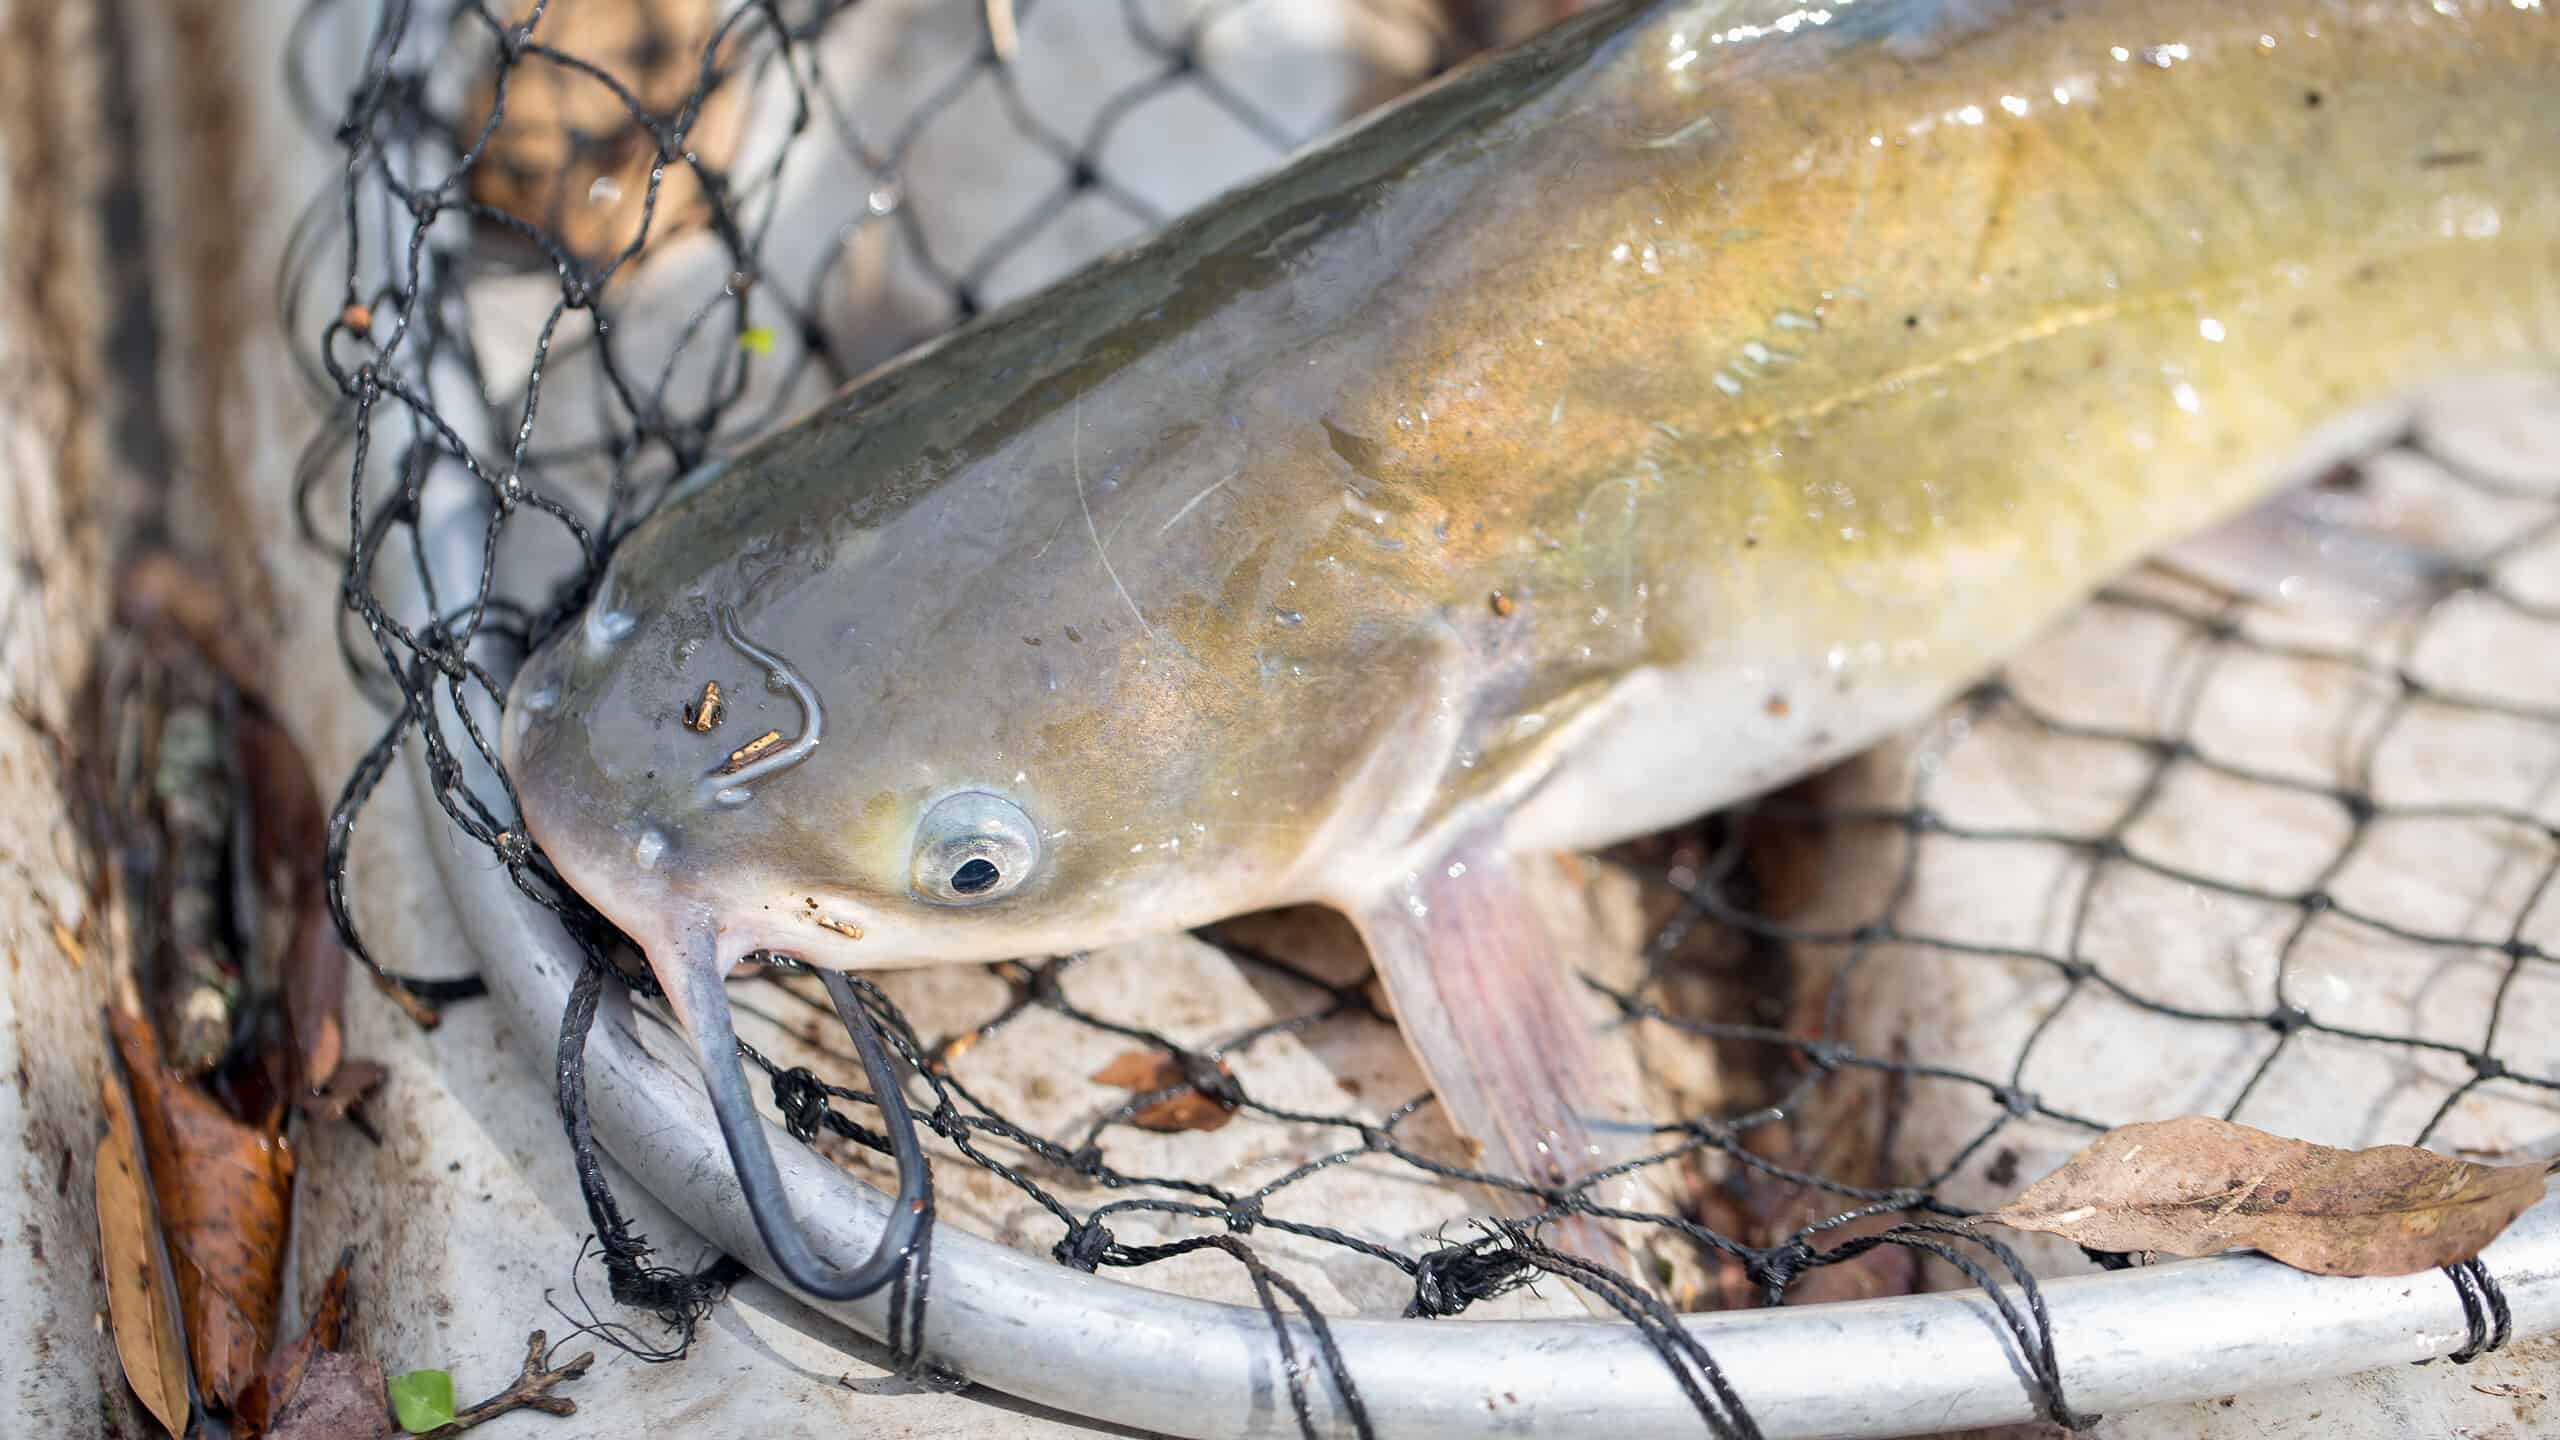 Channel catfish laying in a net in the bottom of a fishing boat.